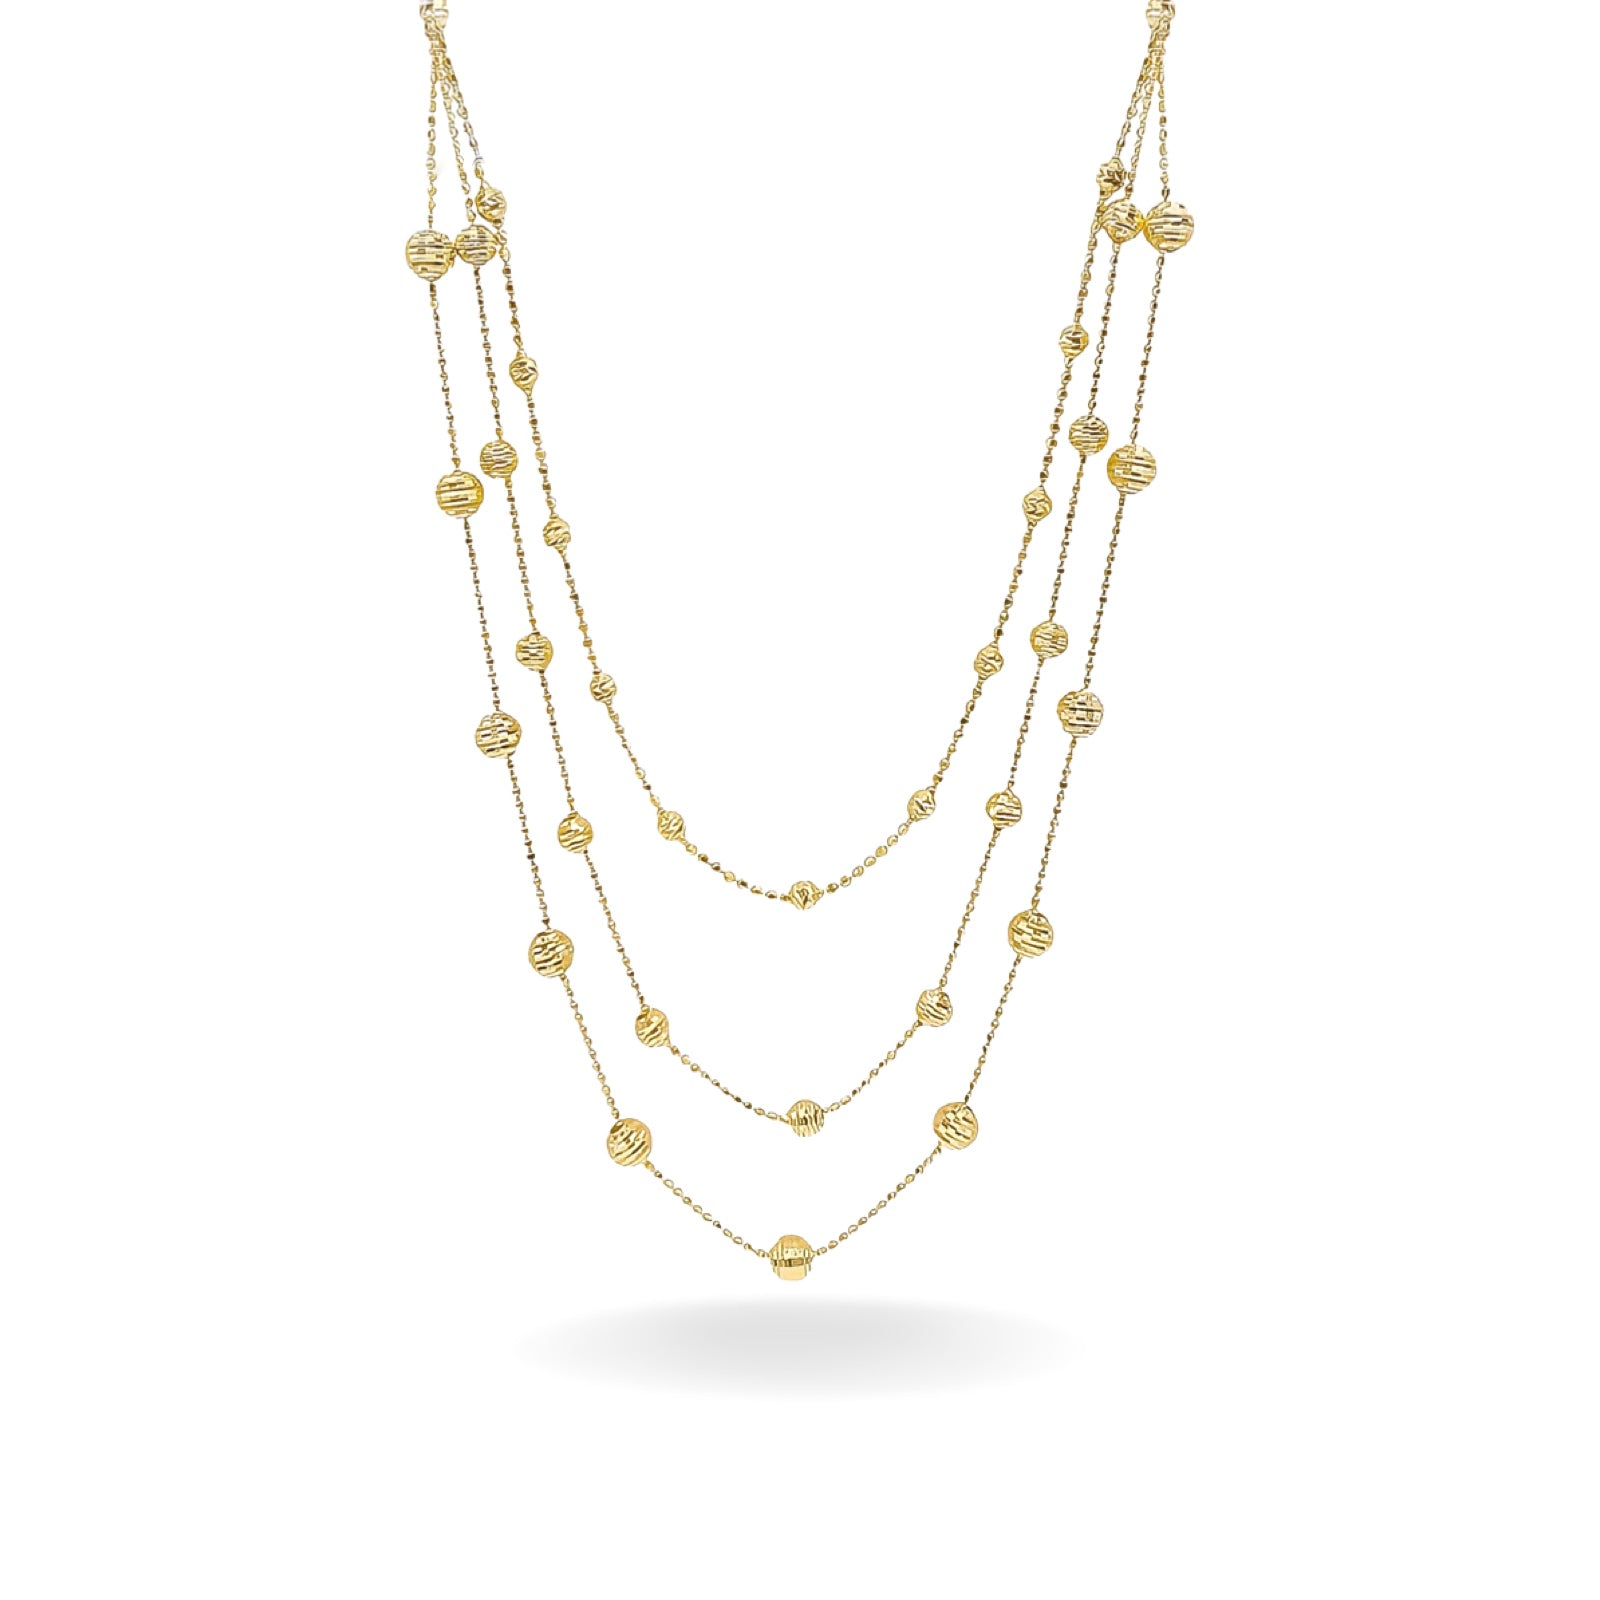 14K YELLOW GOLD TRIPLE LAYERED DISCO BEAD NECKLACE